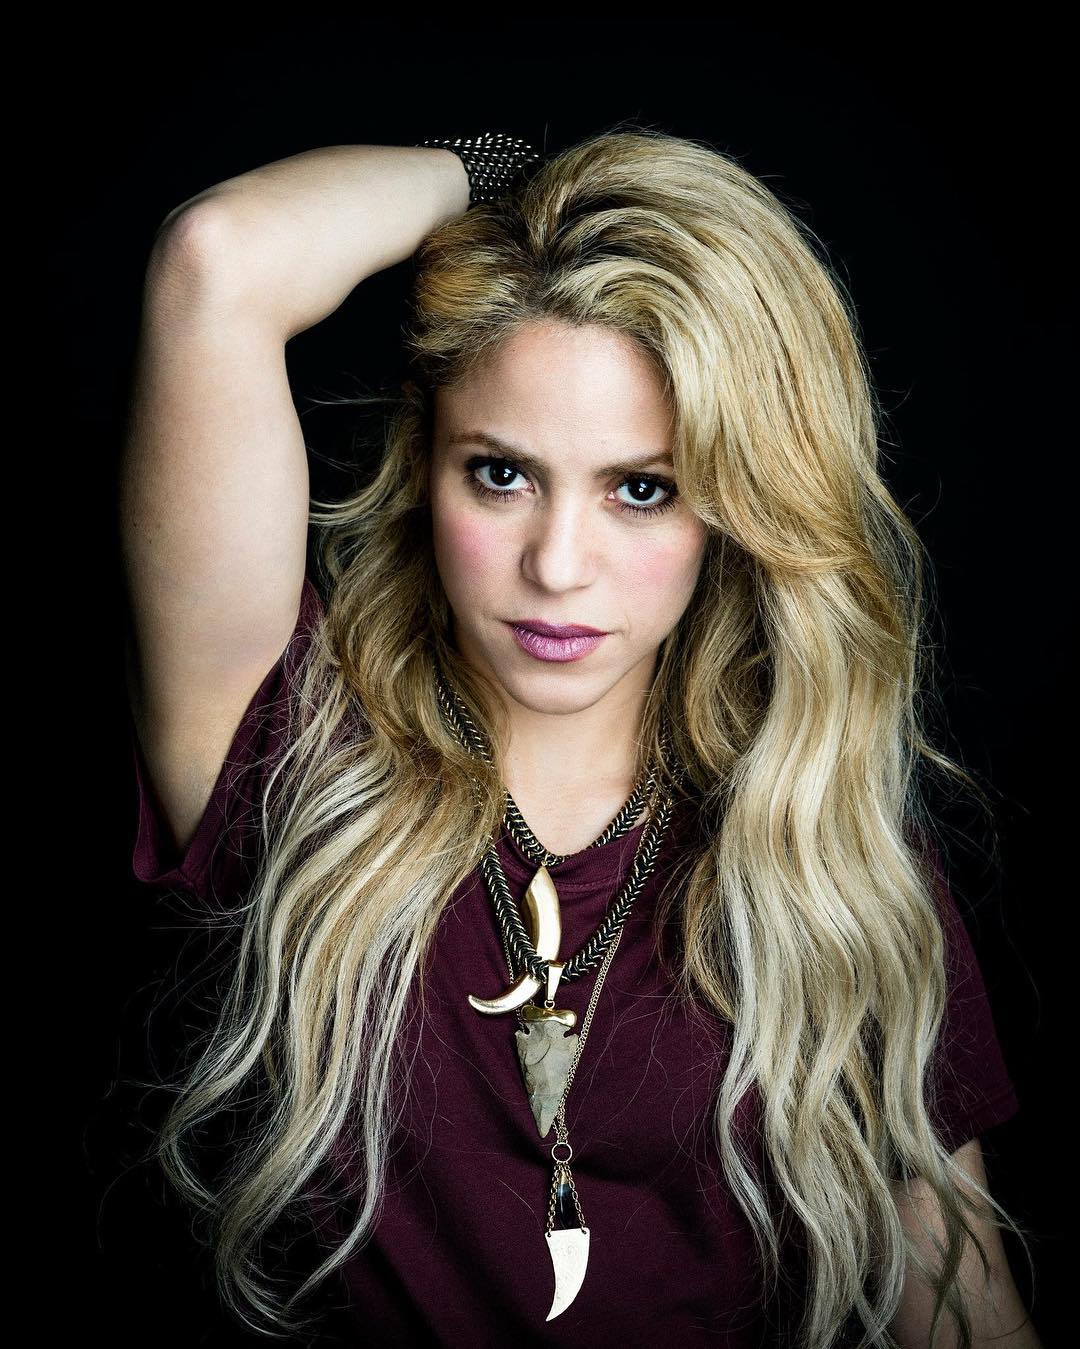 Pictures Of Shakira That Proves She Is Way Too Young To Be 41-Year-Old 